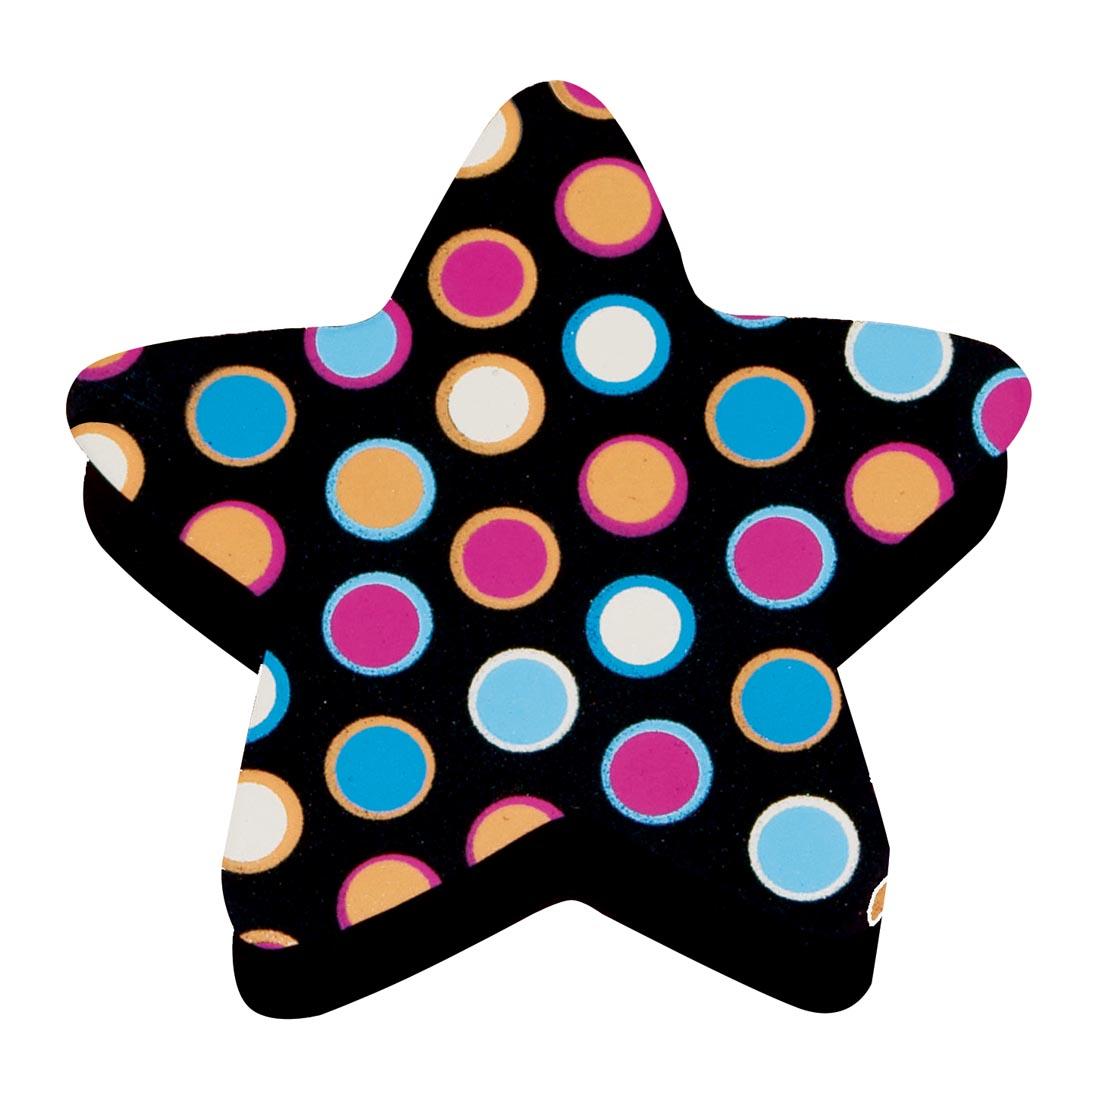 star-shaped magnetic whiteboard eraser with colorful polka-dots